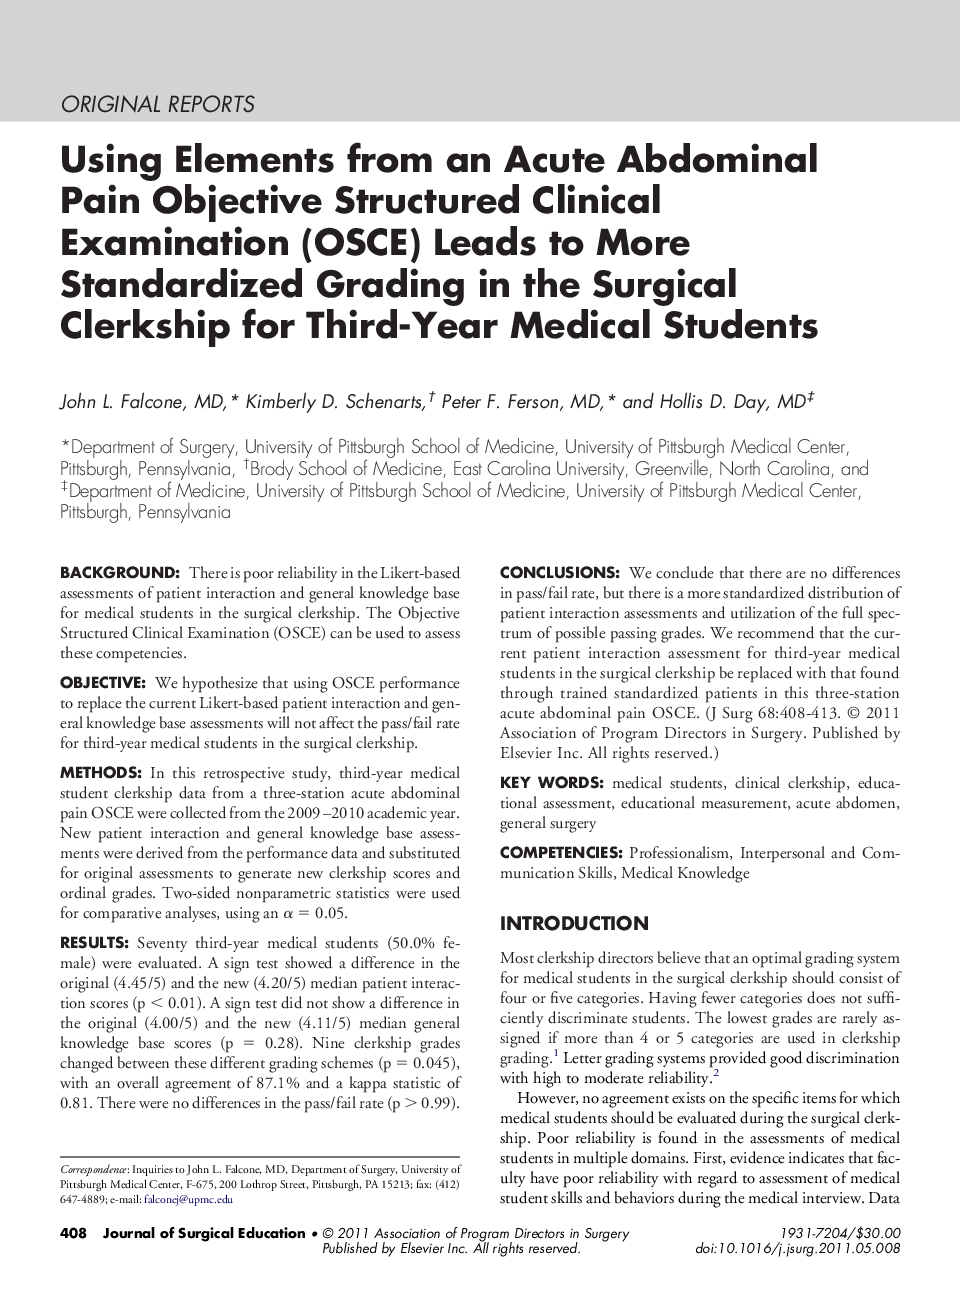 Using Elements from an Acute Abdominal Pain Objective Structured Clinical Examination (OSCE) Leads to More Standardized Grading in the Surgical Clerkship for Third-Year Medical Students